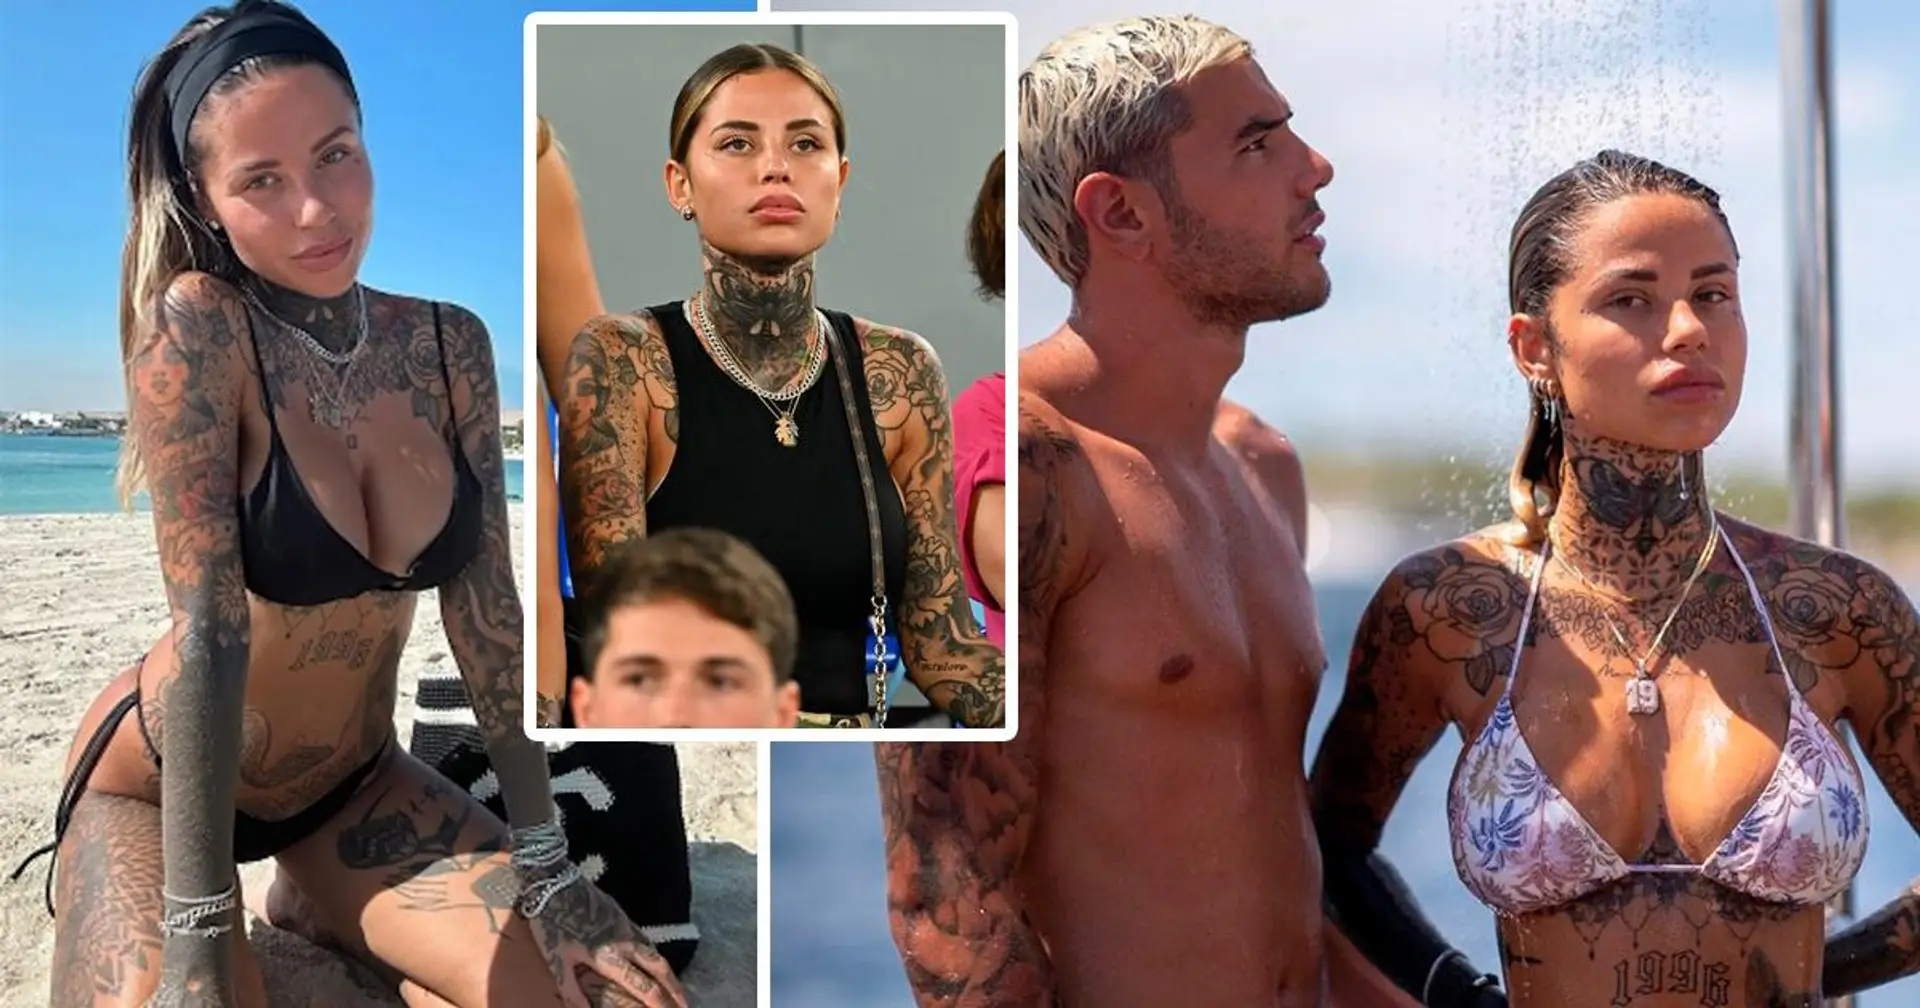 Meet Theo Hernandez's stunning girlfriend fully covered in tattoos - including huge neck ink